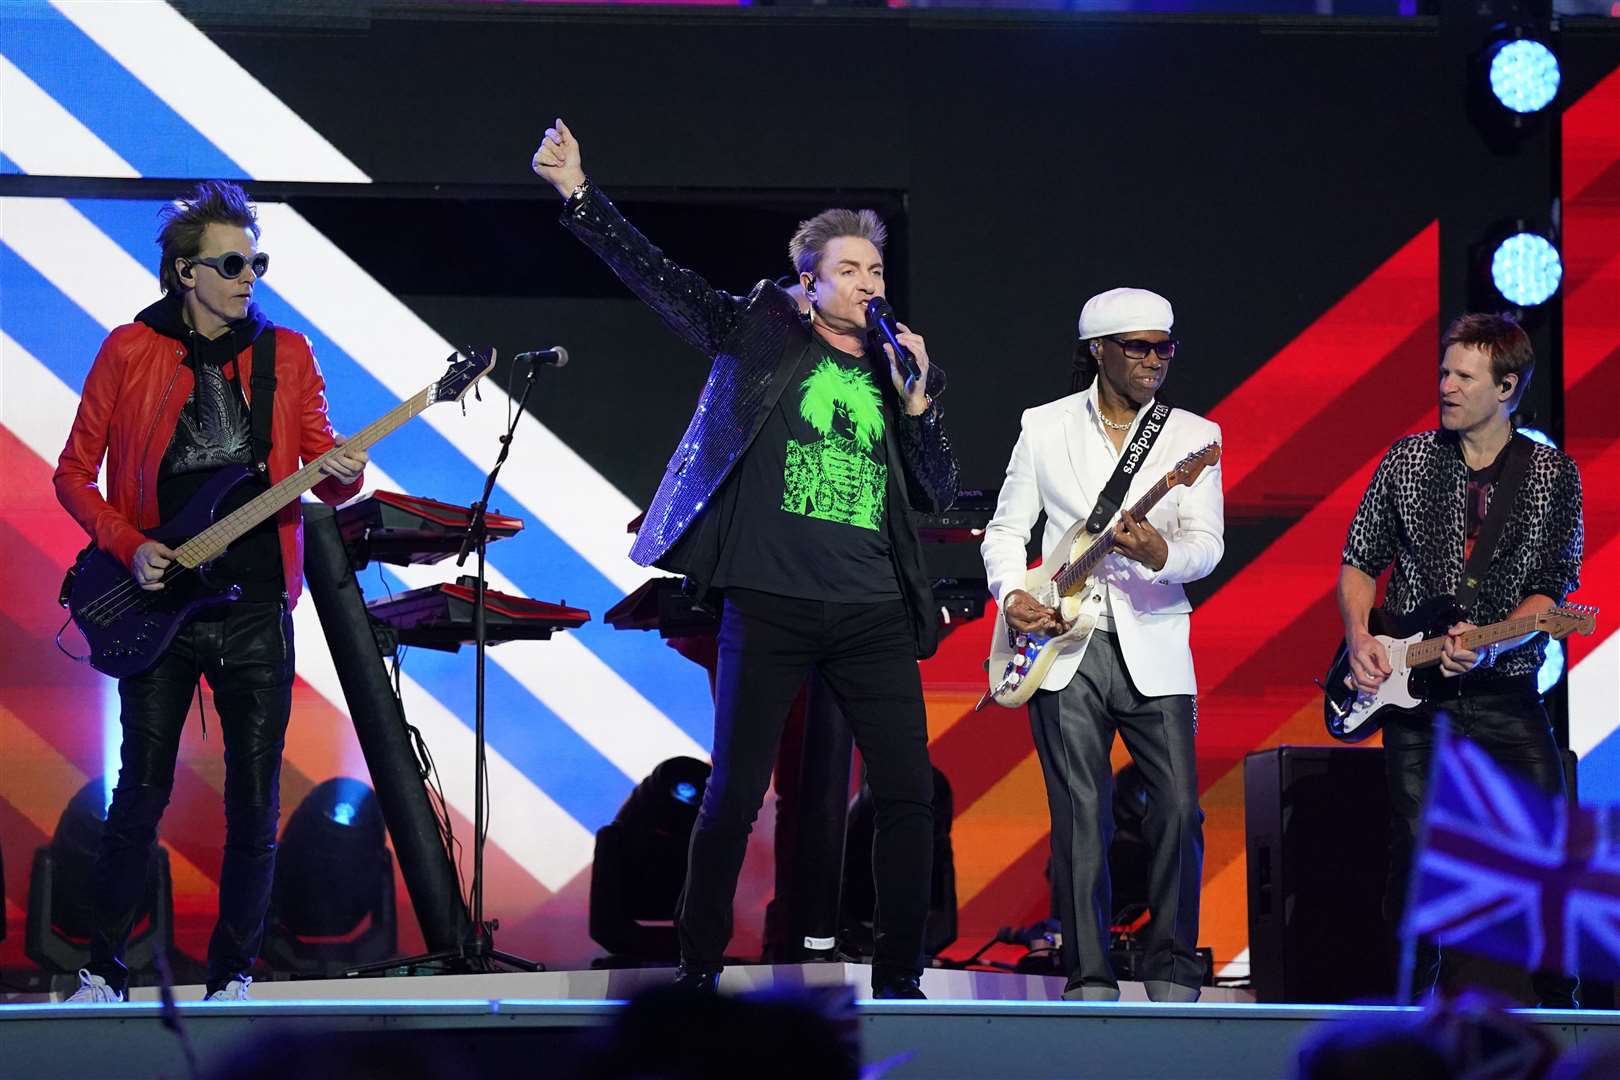 Duran Duran and Nile Rodgers perform during the party. (Jacob King/PA)